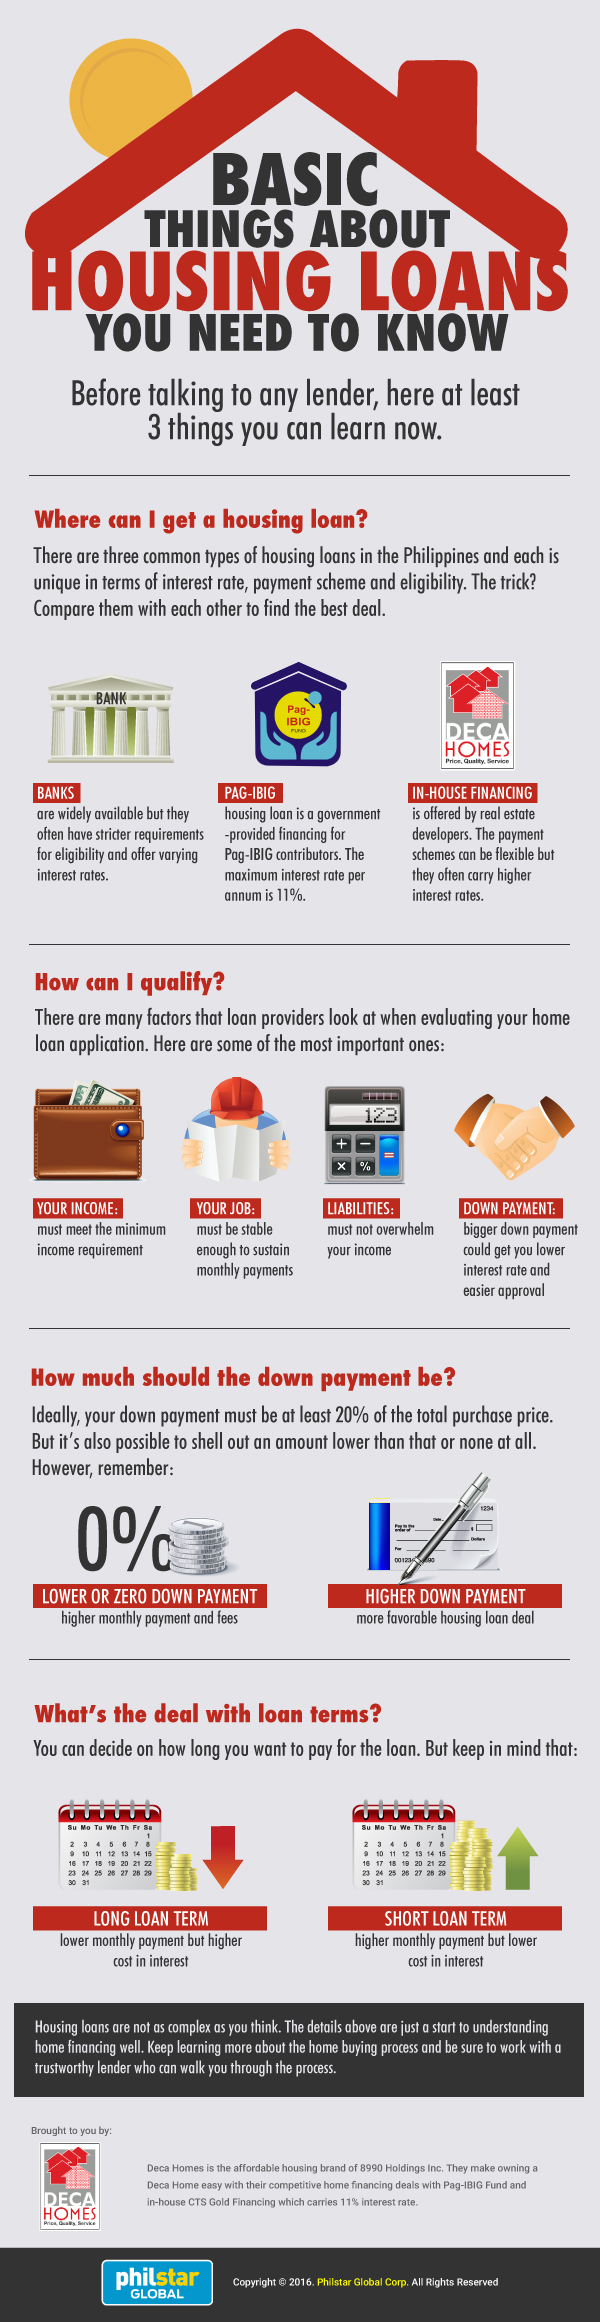 basic things about housing loans infographic